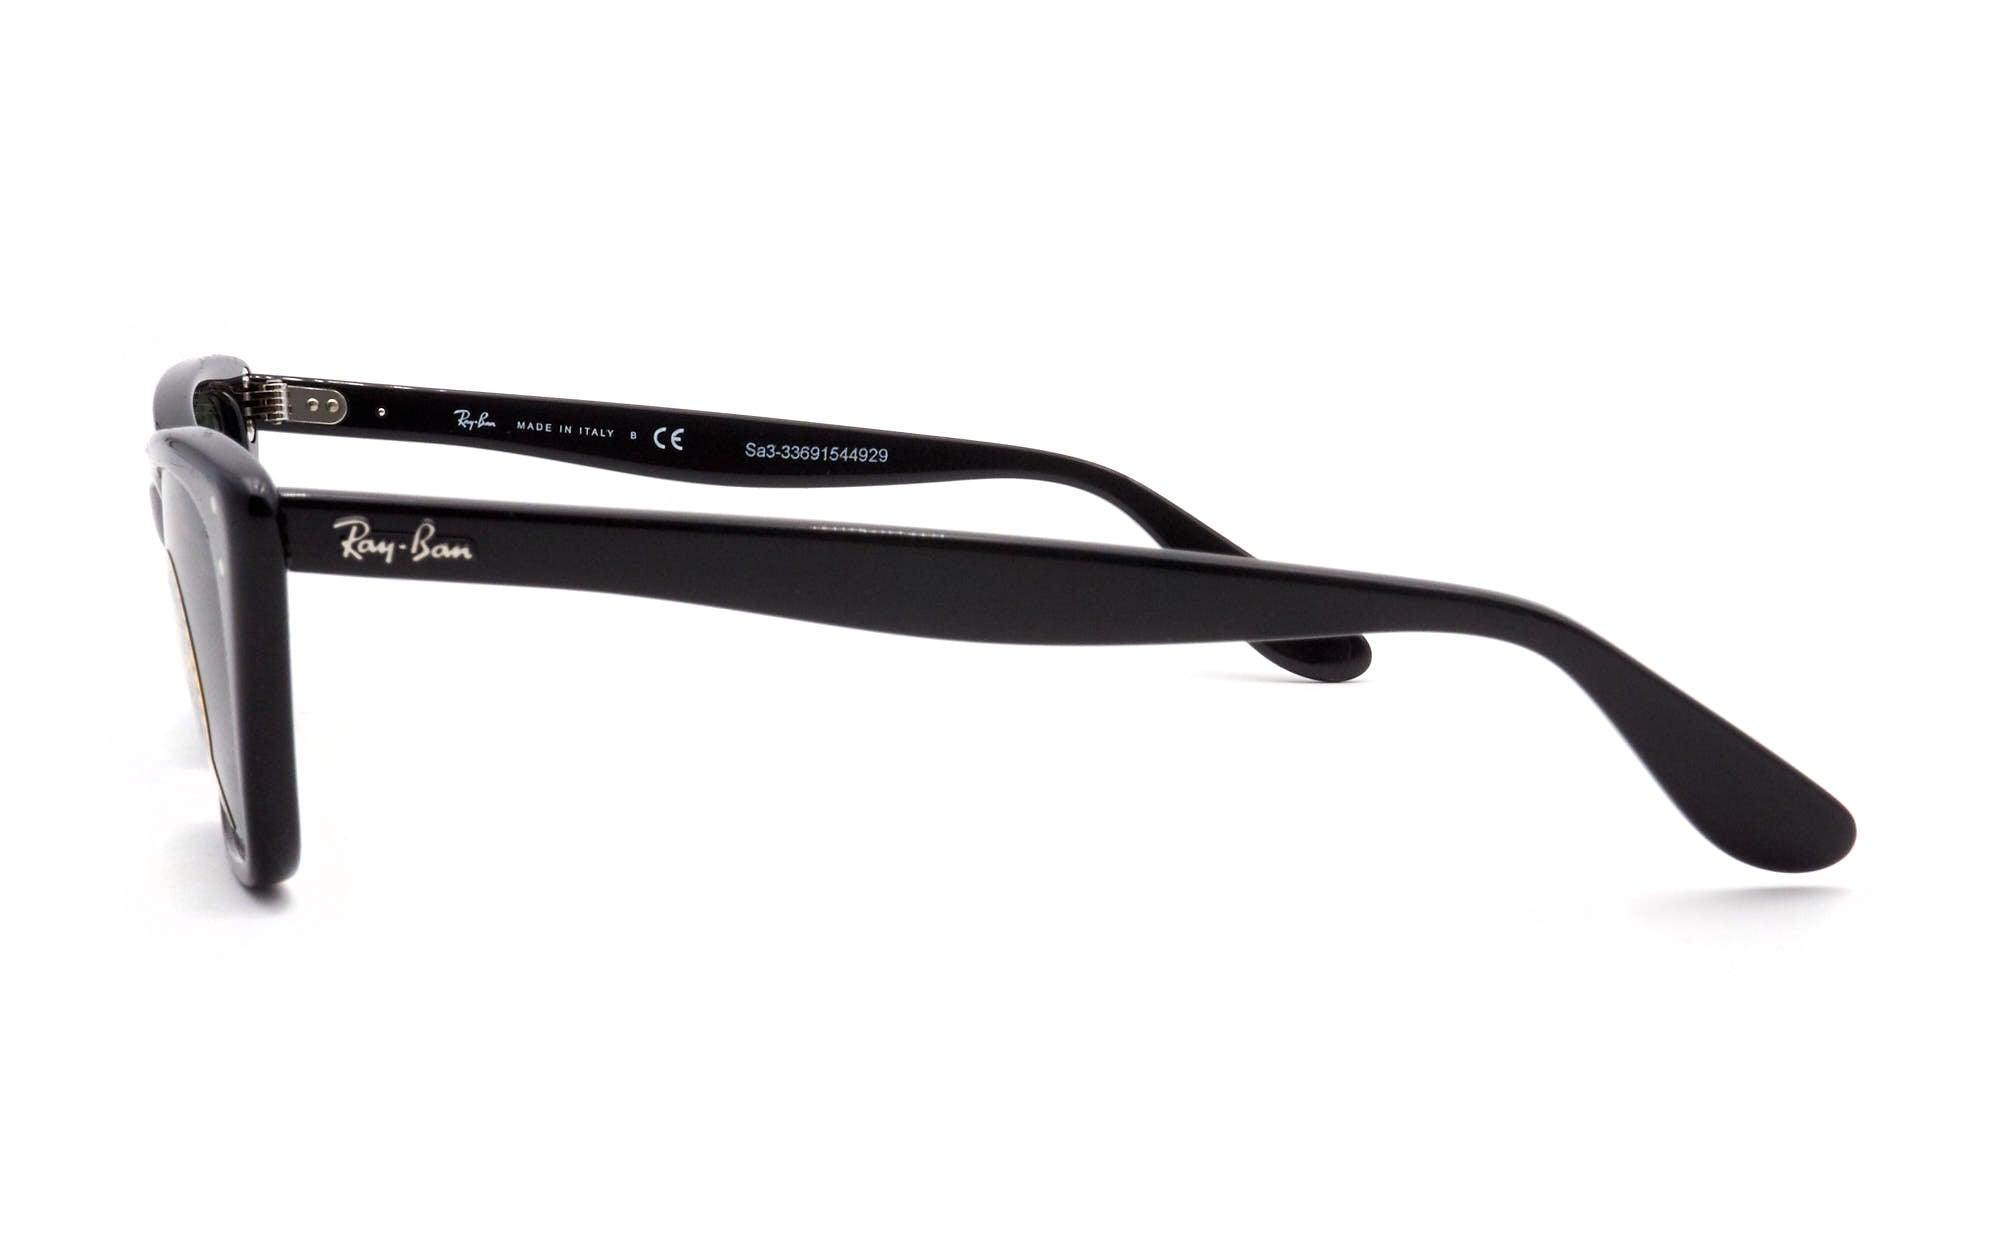 ray-ban 2299 lady burbank 901/31 - Opticas Lookout